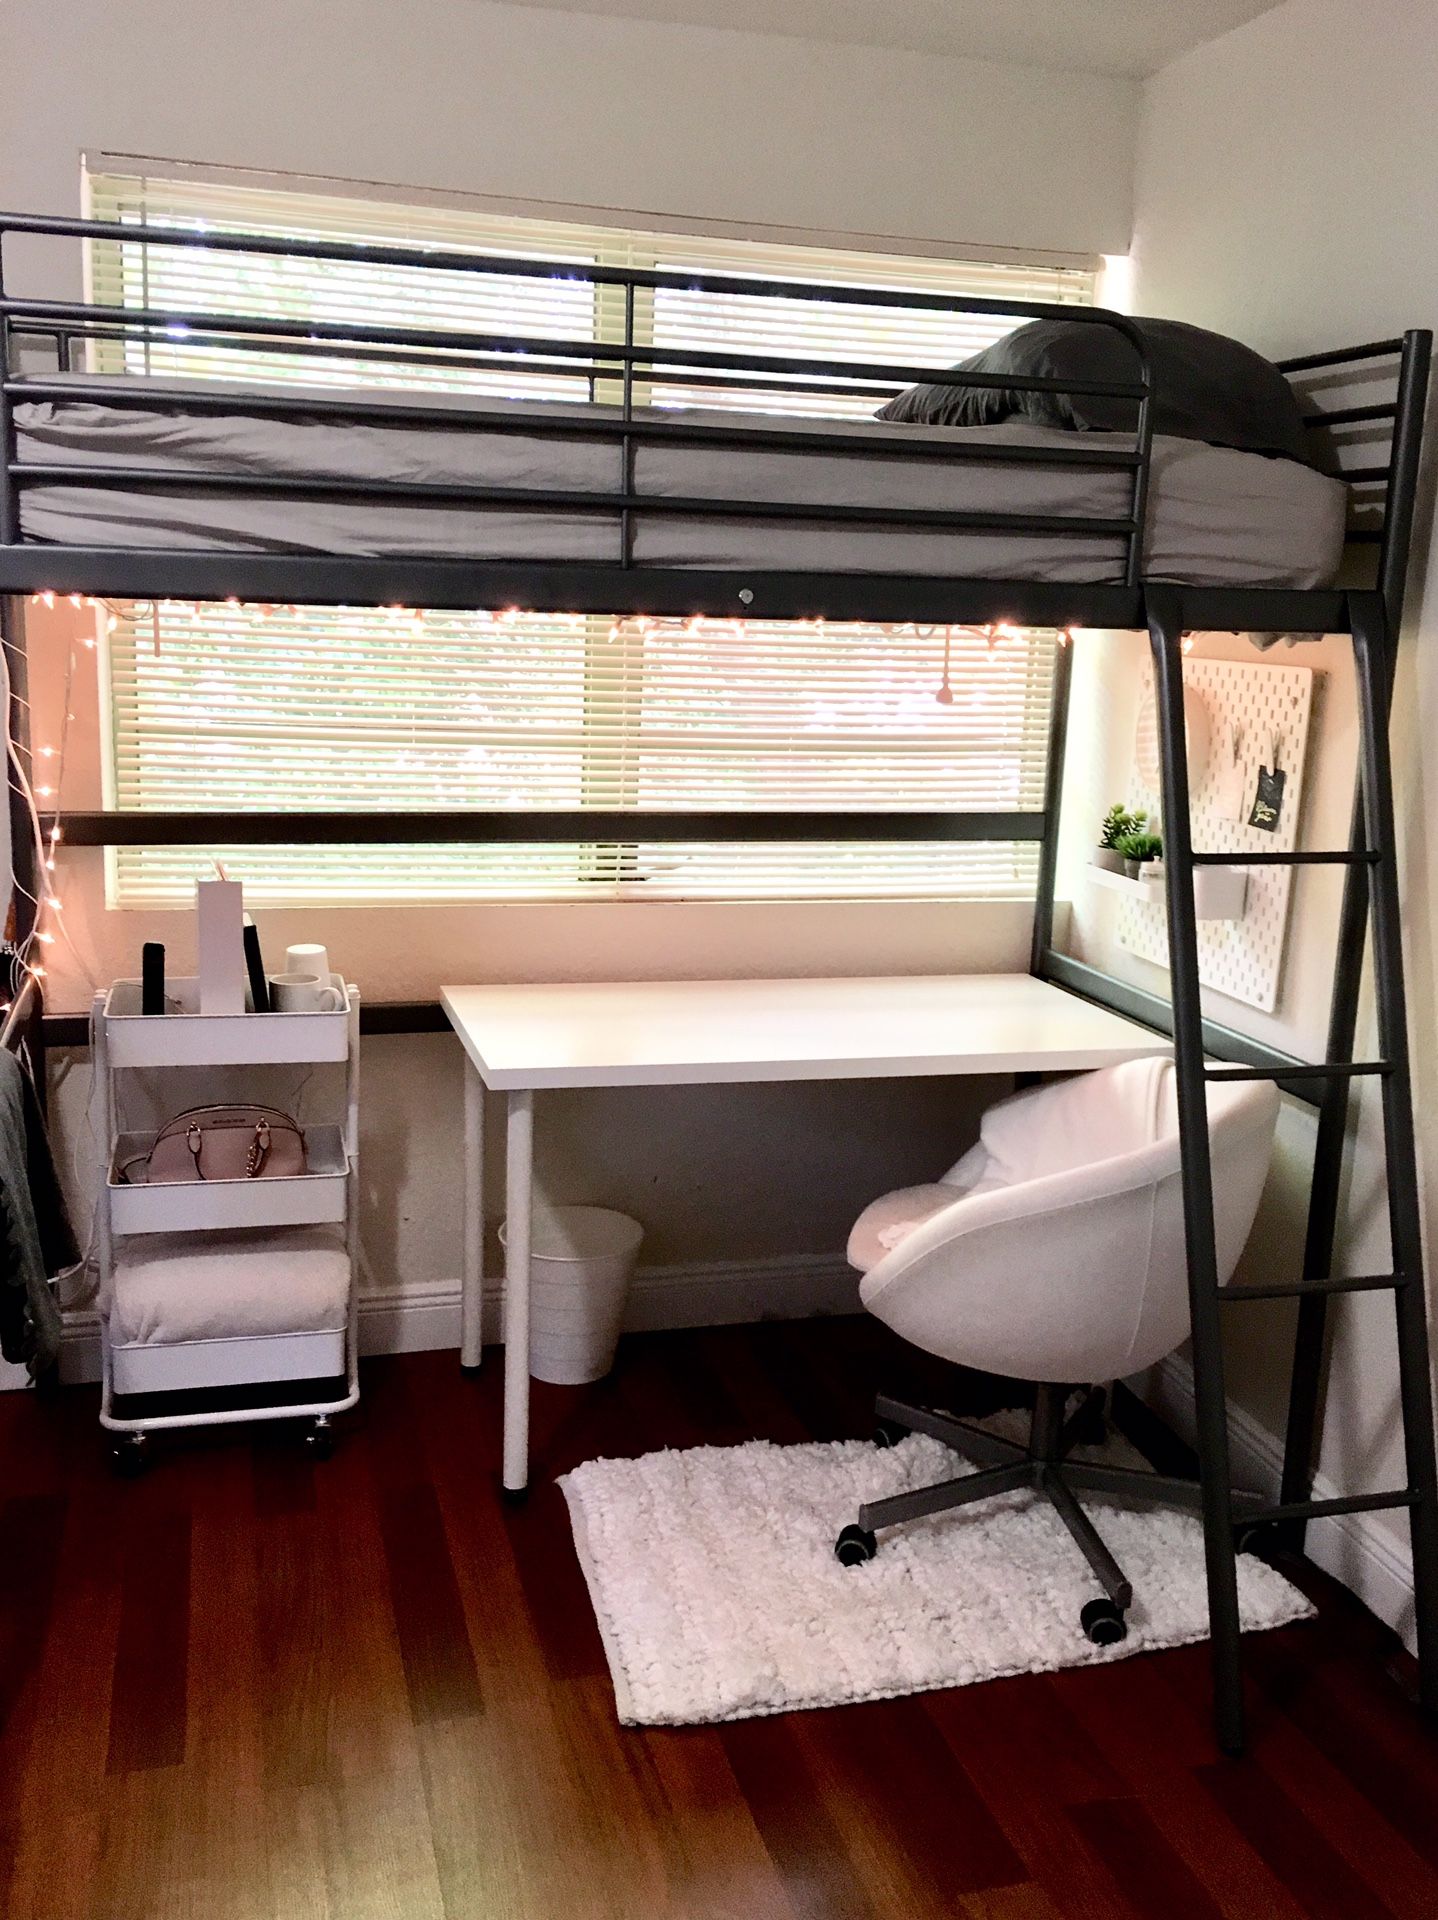 Loft bed with mattress for sale!!